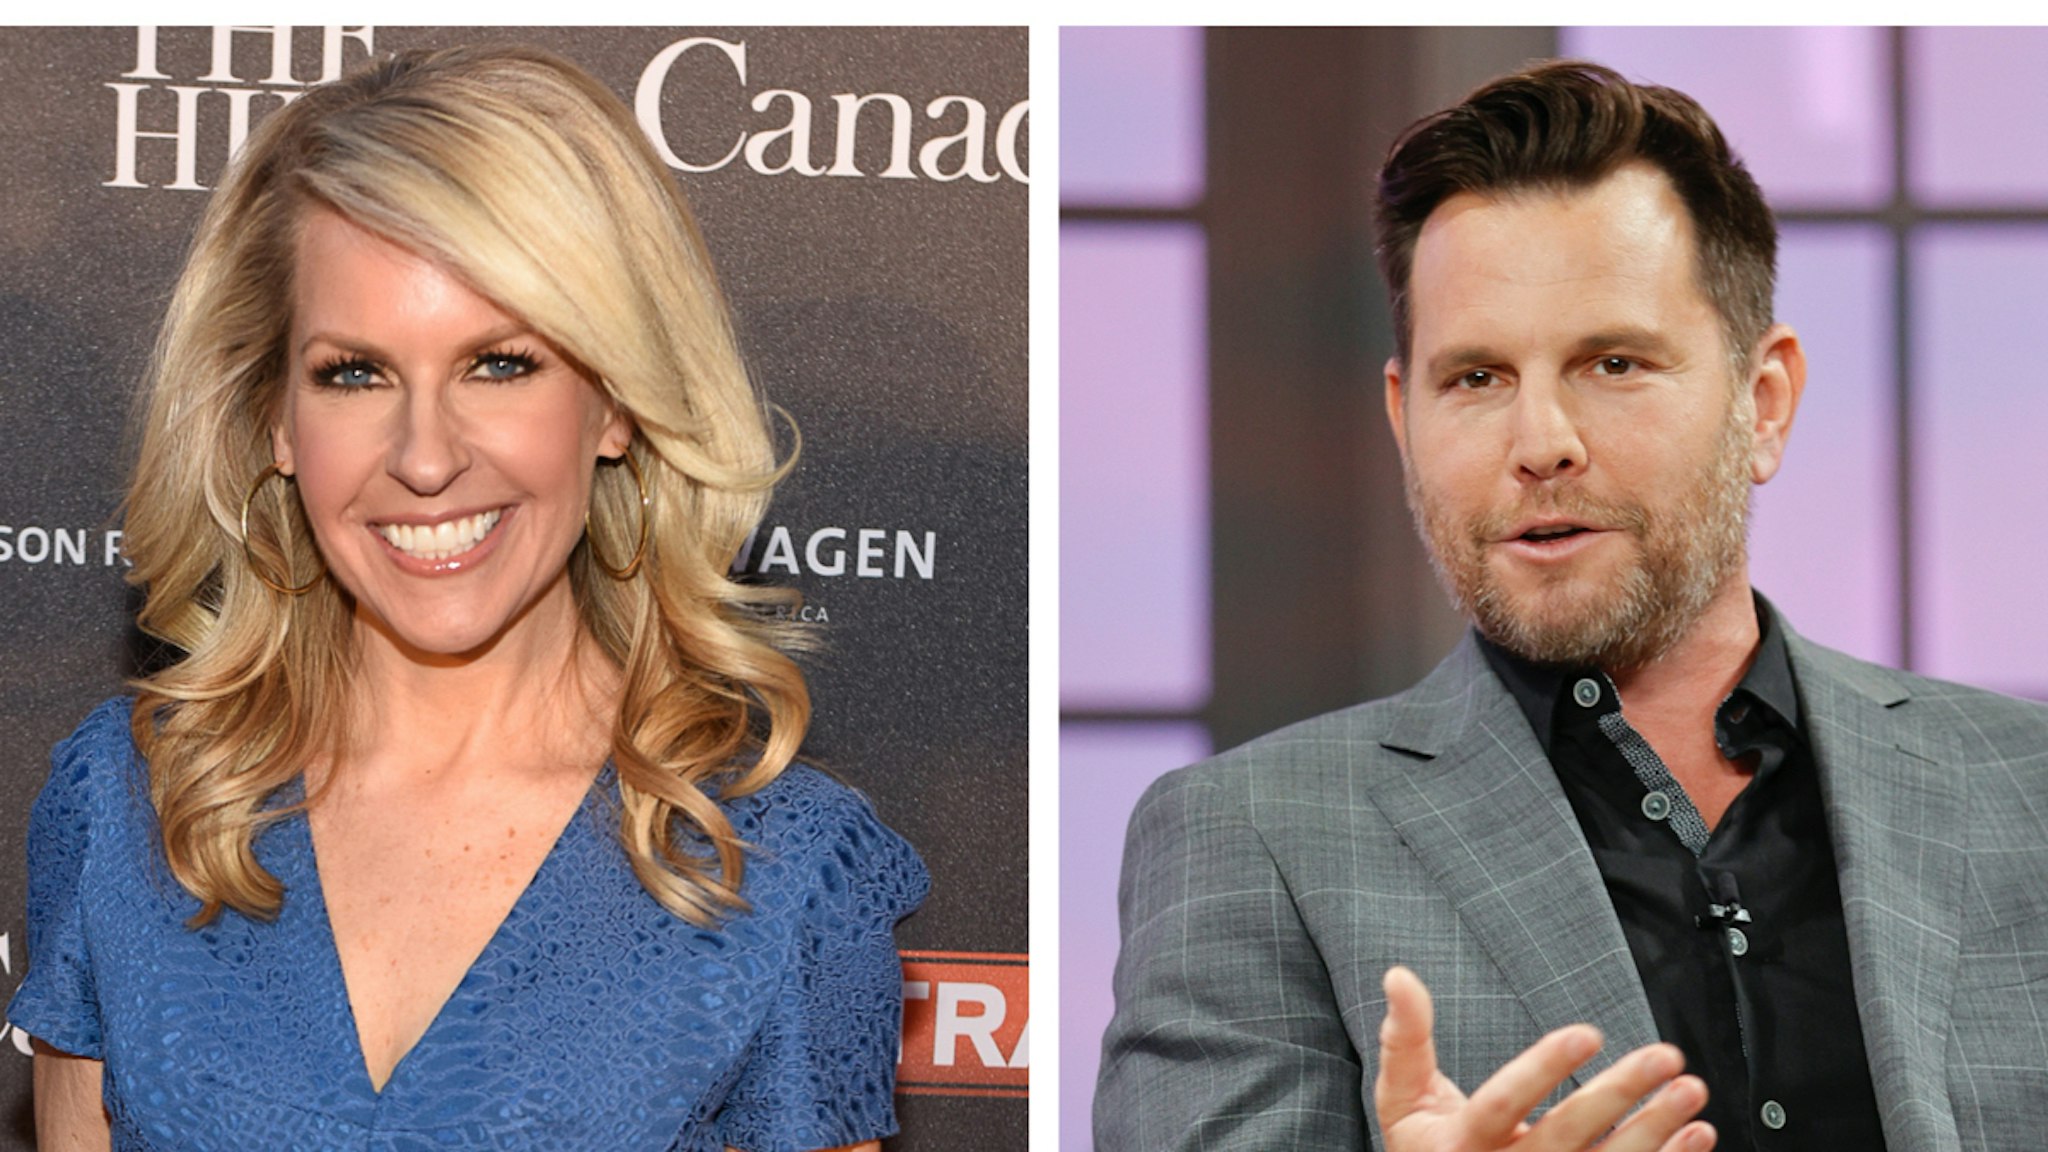 Monica Crowley attends the The Hill, Extra And The Embassy Of Canada Celebrate The White House Correspondents' Dinner Weekend at Embassy of Canada on April 24, 2015 in Washington, DC. Dave Rubin is seen on the set of "Candace" on April 28, 2021 in Nashville, Tennessee. The show will air on Friday, April 30, 2021.